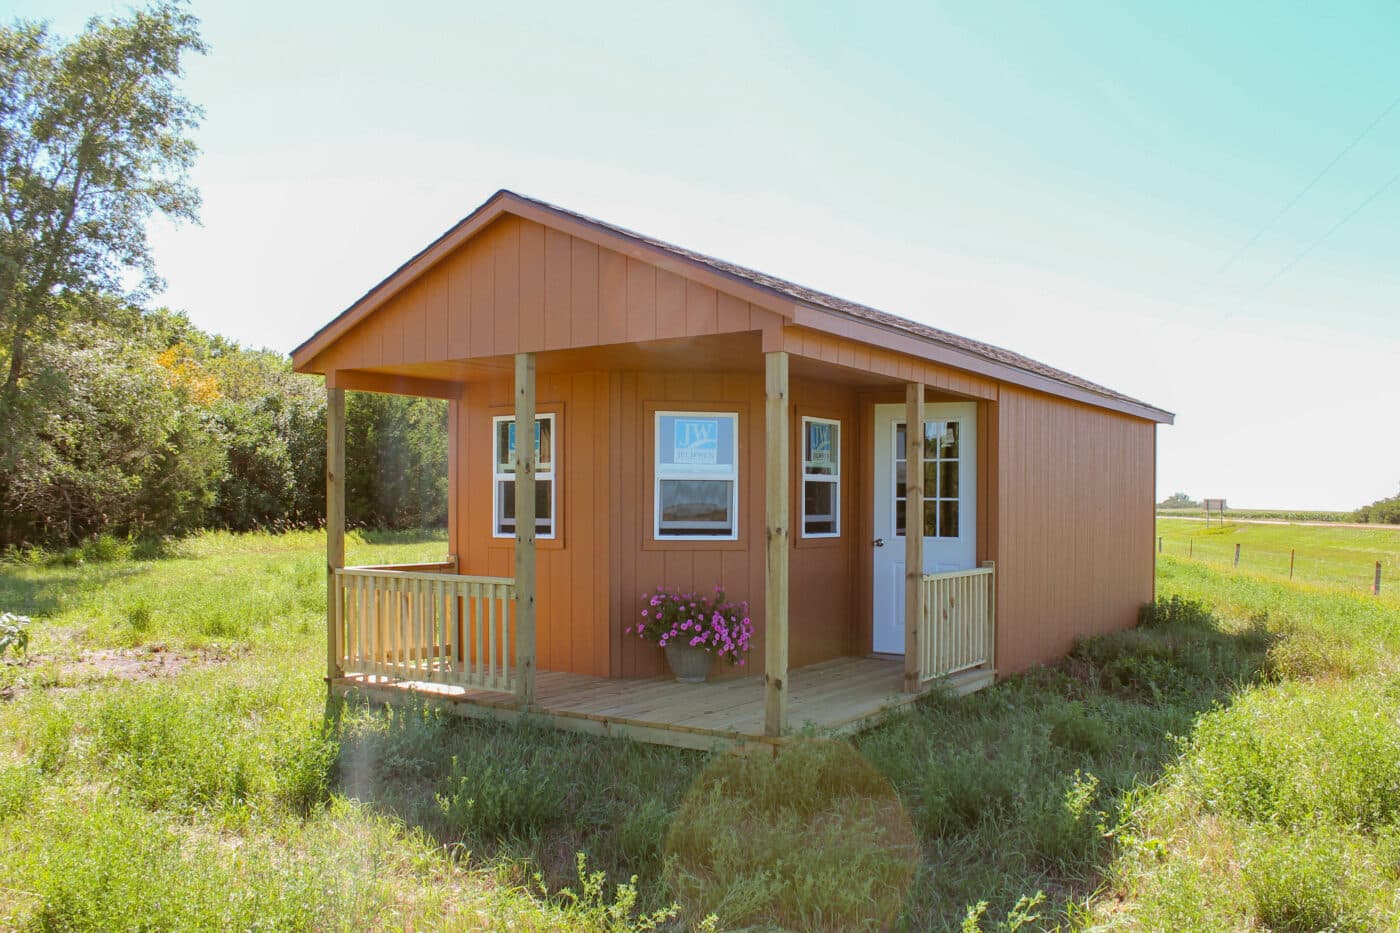 Brown A-Frame Cabin shed with wraparound porch